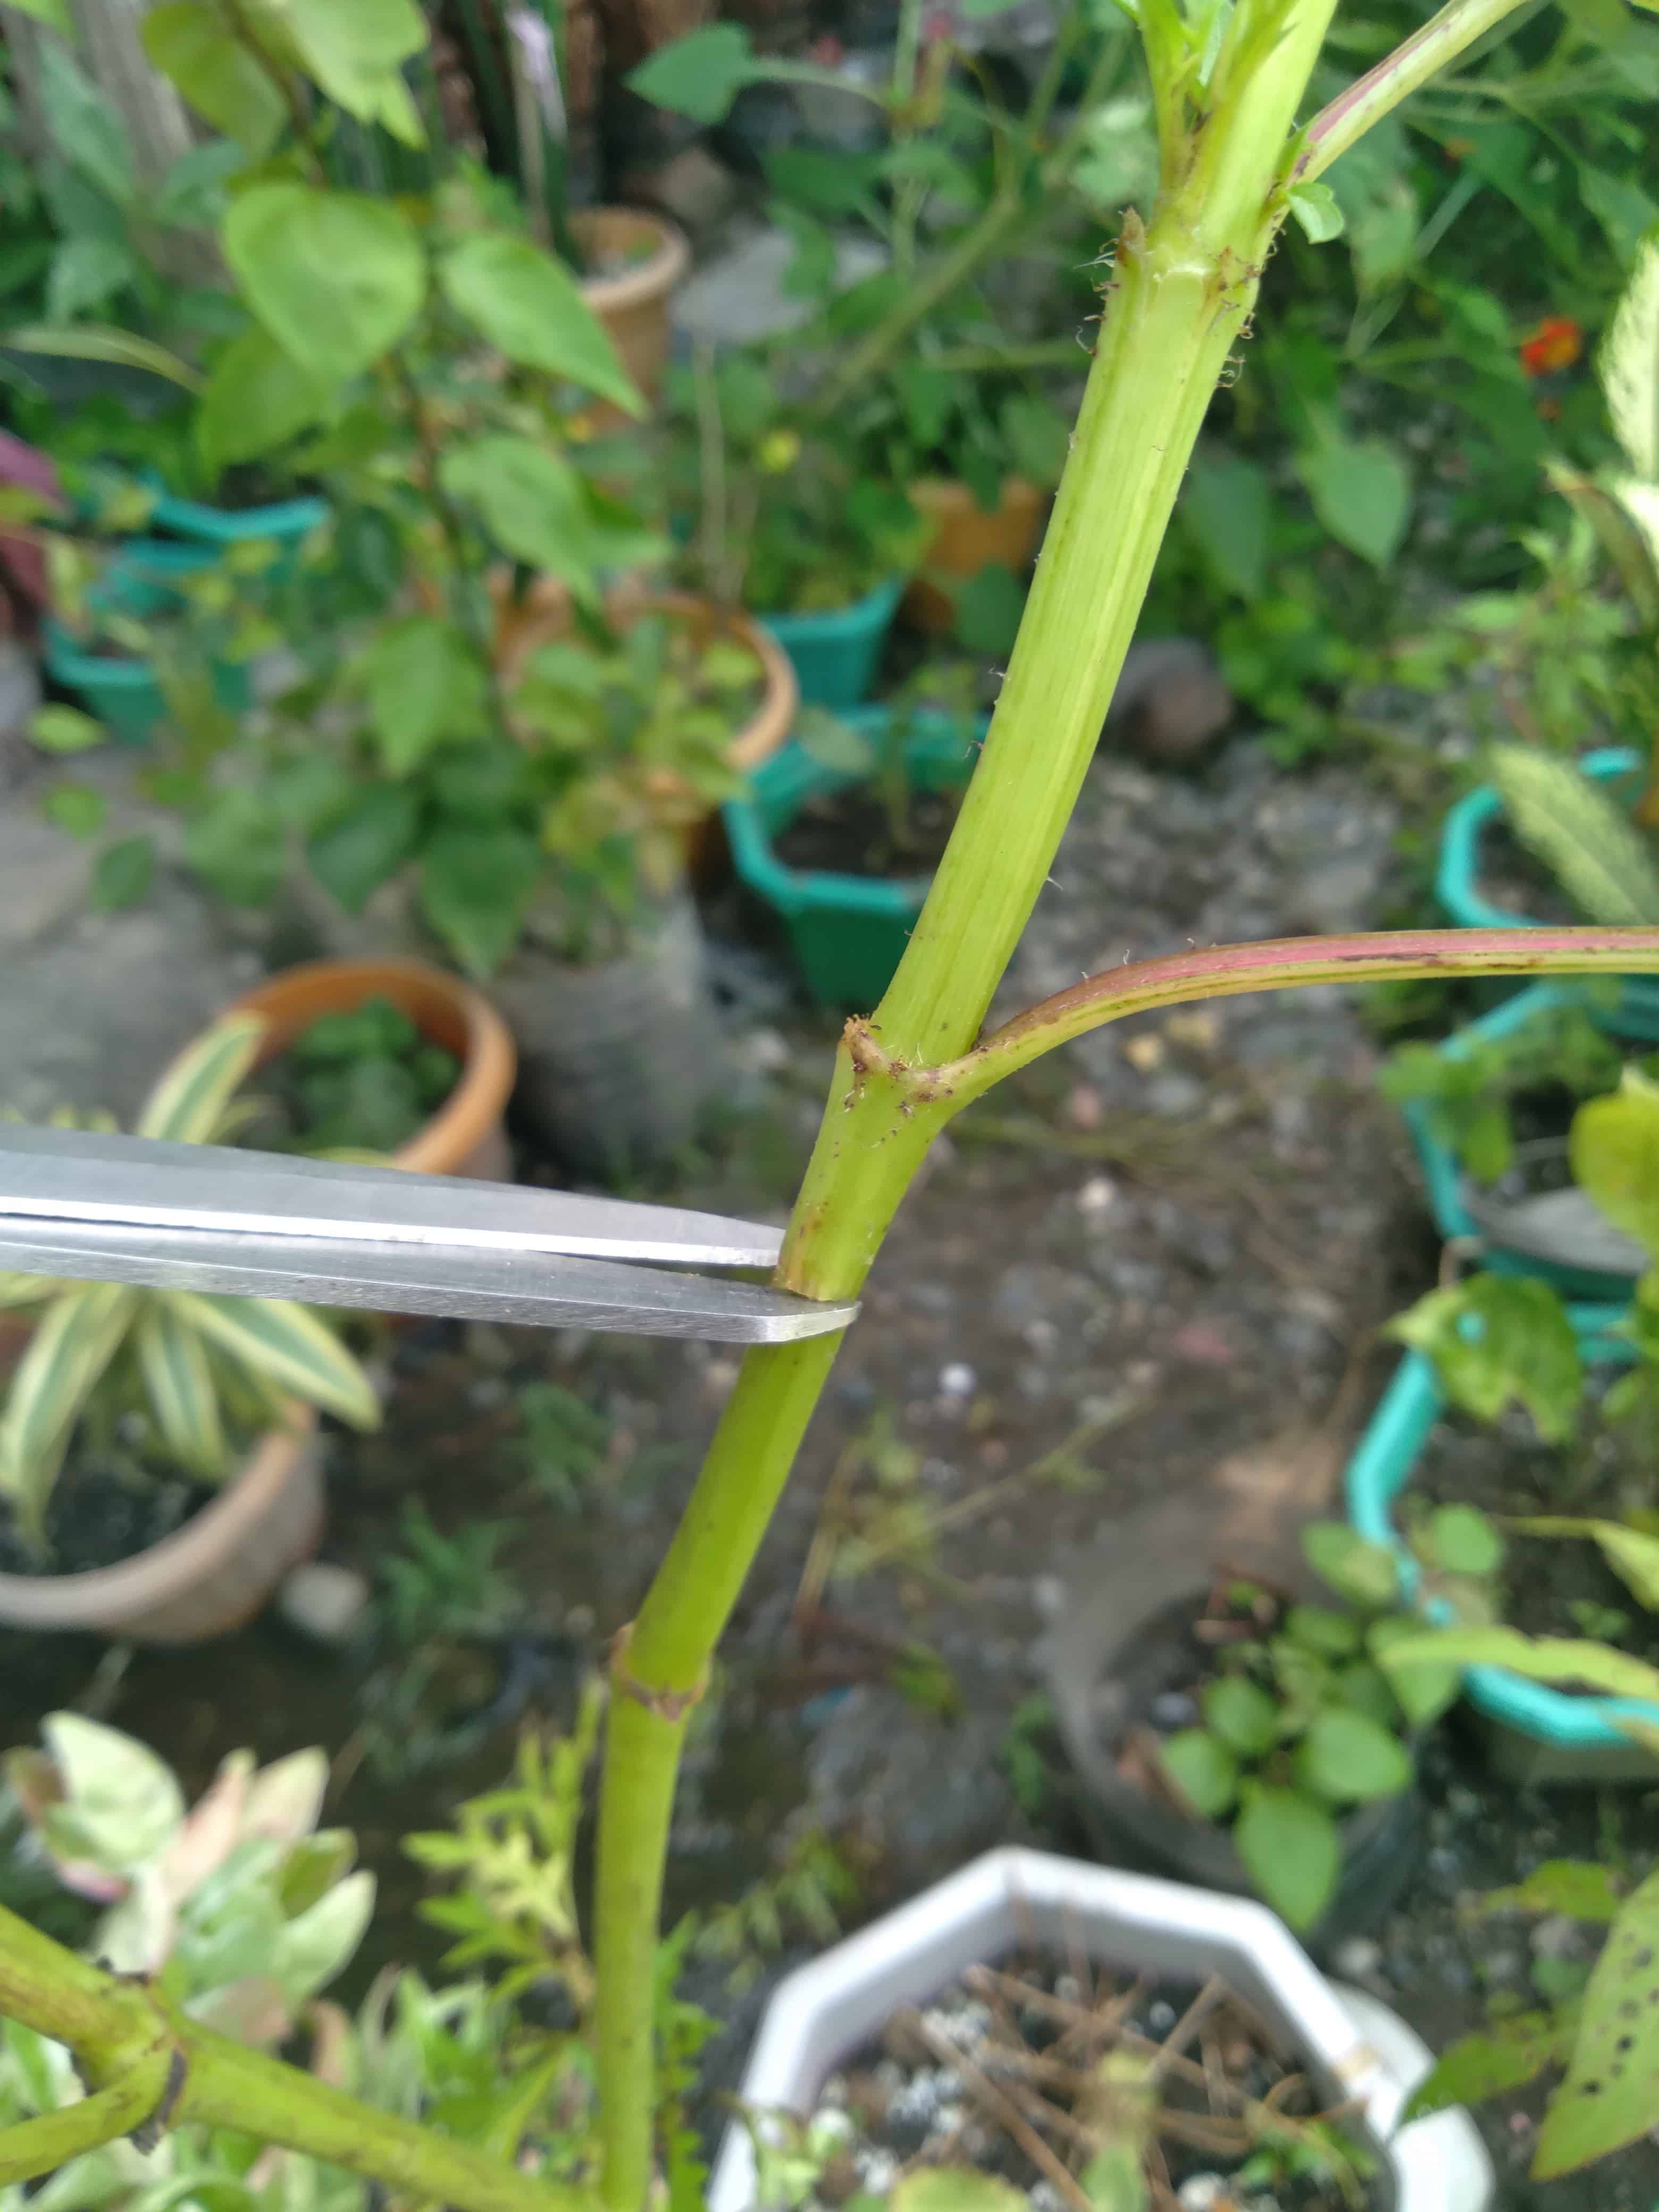 Making a small cut/incision on a plant's stem below a node